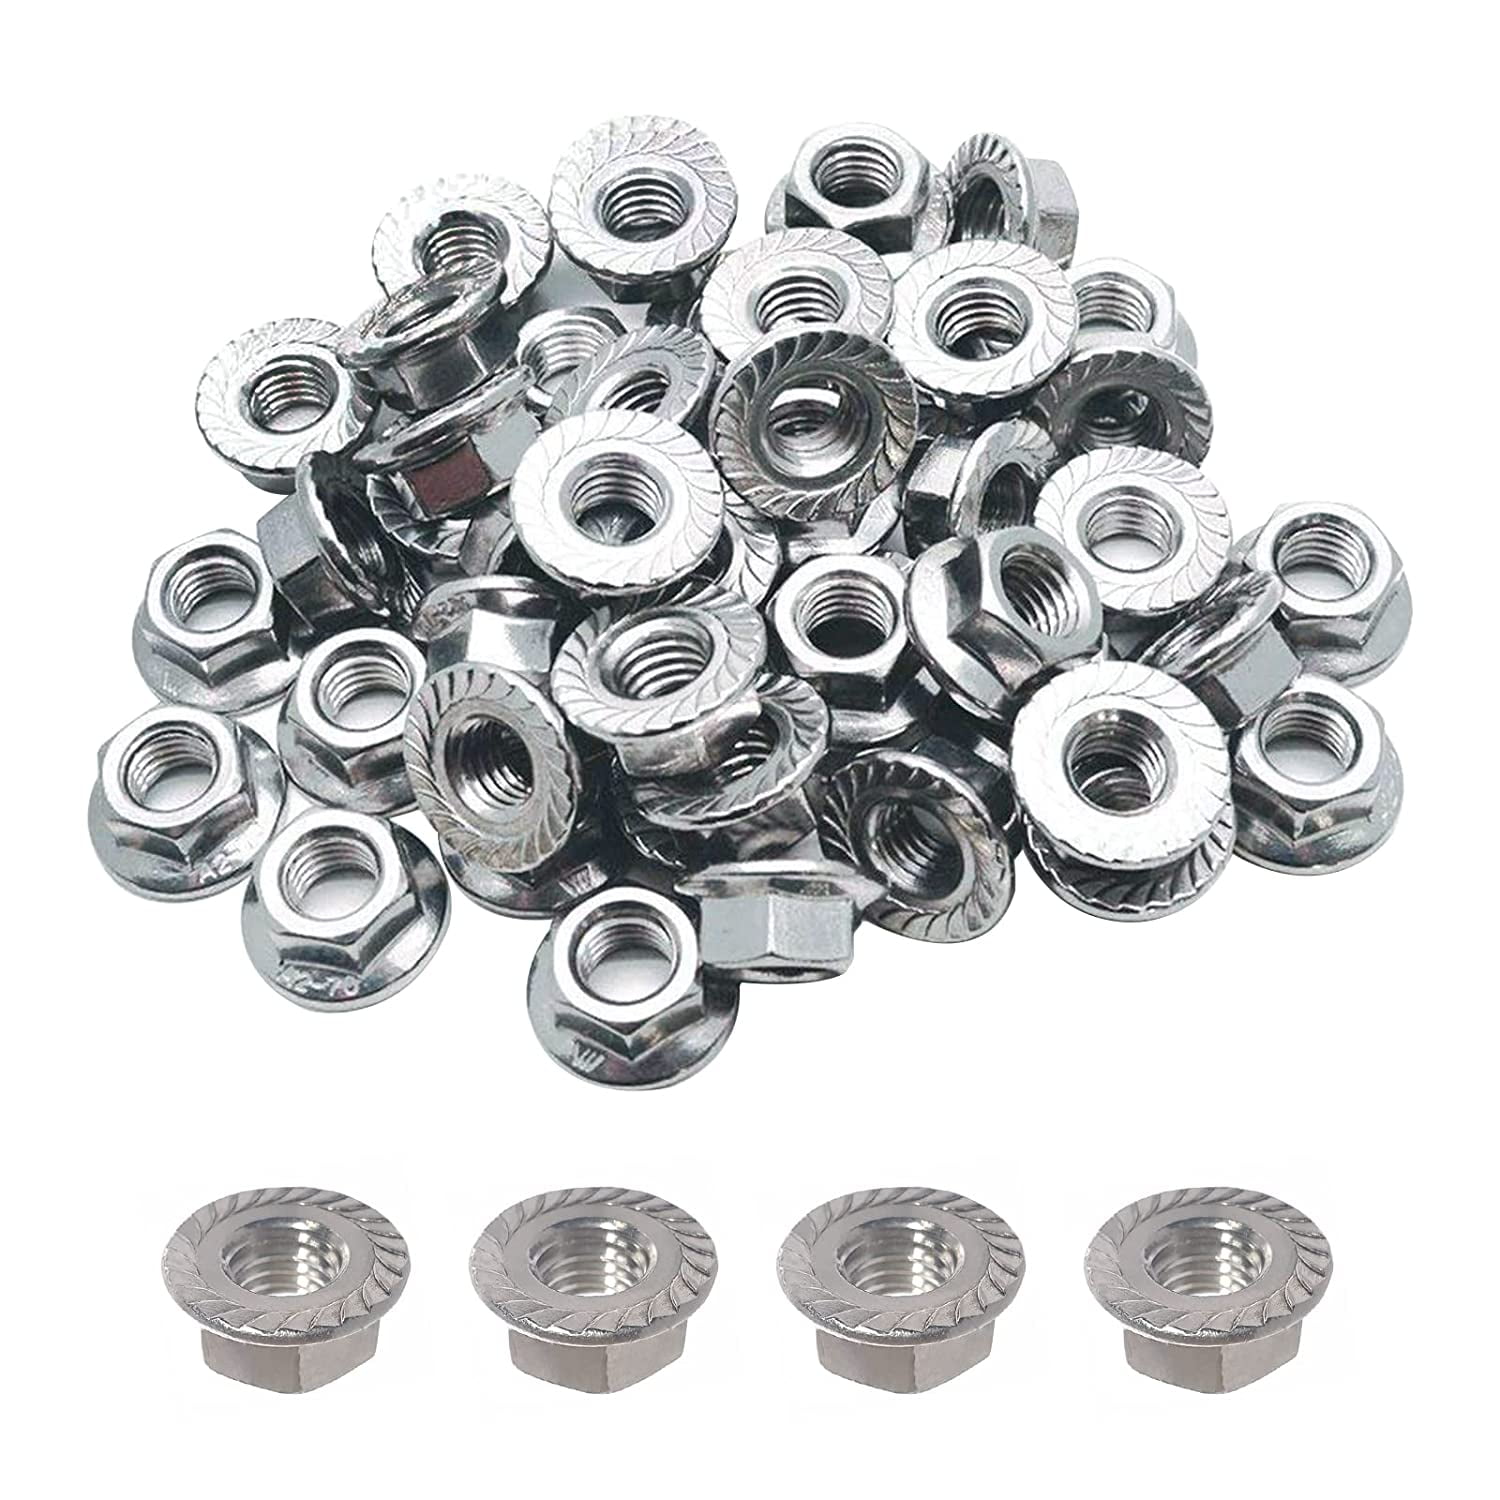 FORD Car Hex Head Flange Nuts Serrated Zinc Plated Nut Locking Clips 